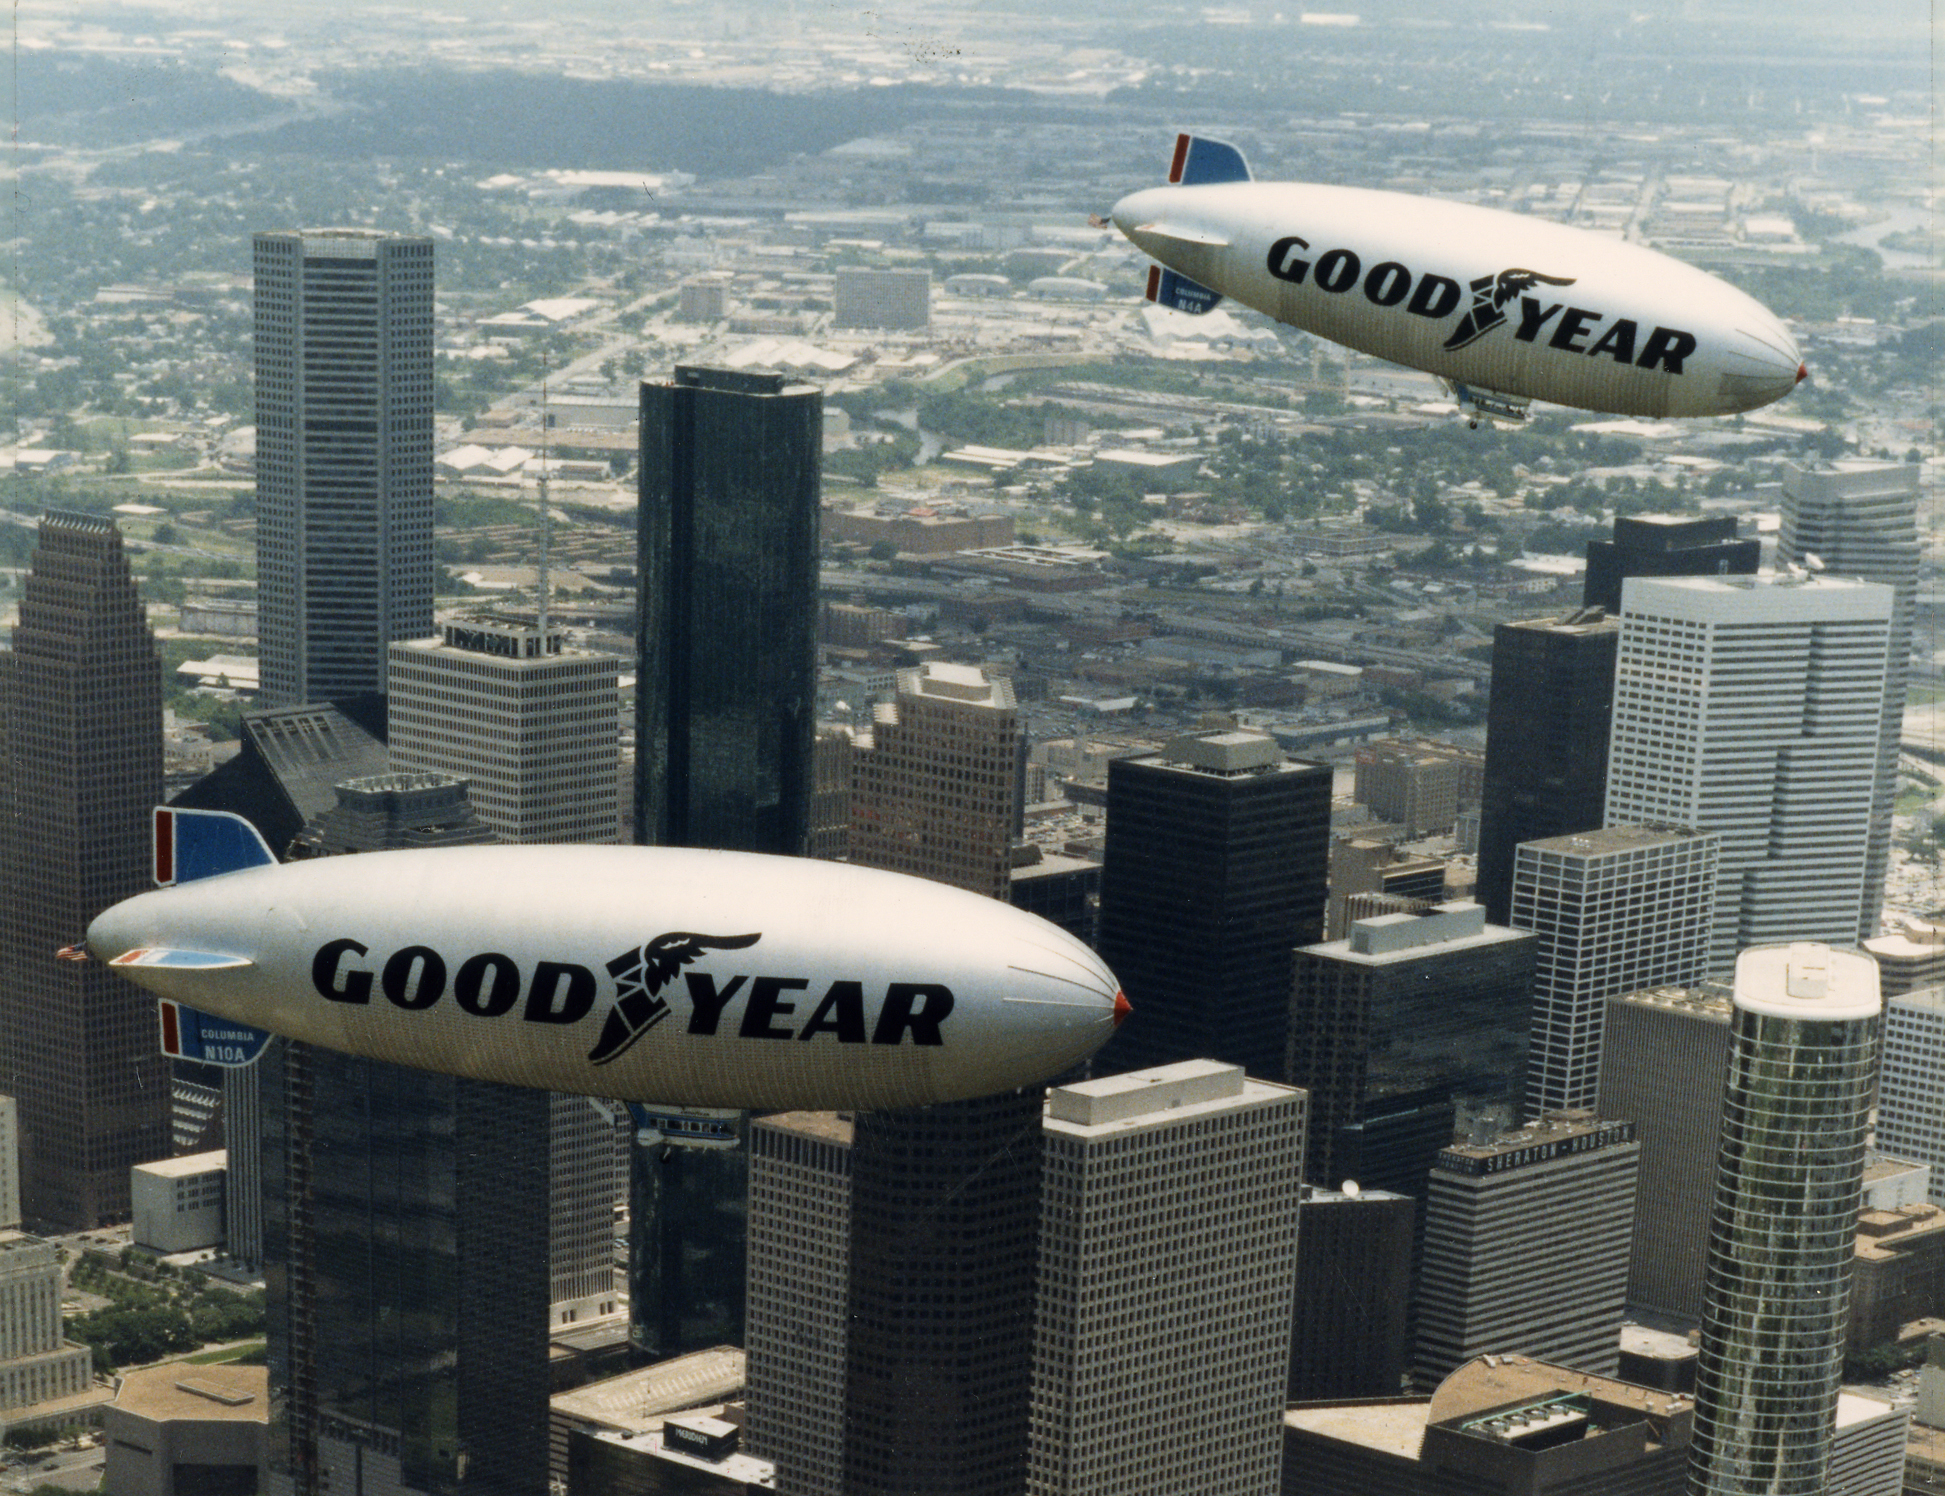 A historic photo of Houston's downtown in 1986, with two Goodyear Blimps floating over the tall skyscrapers.